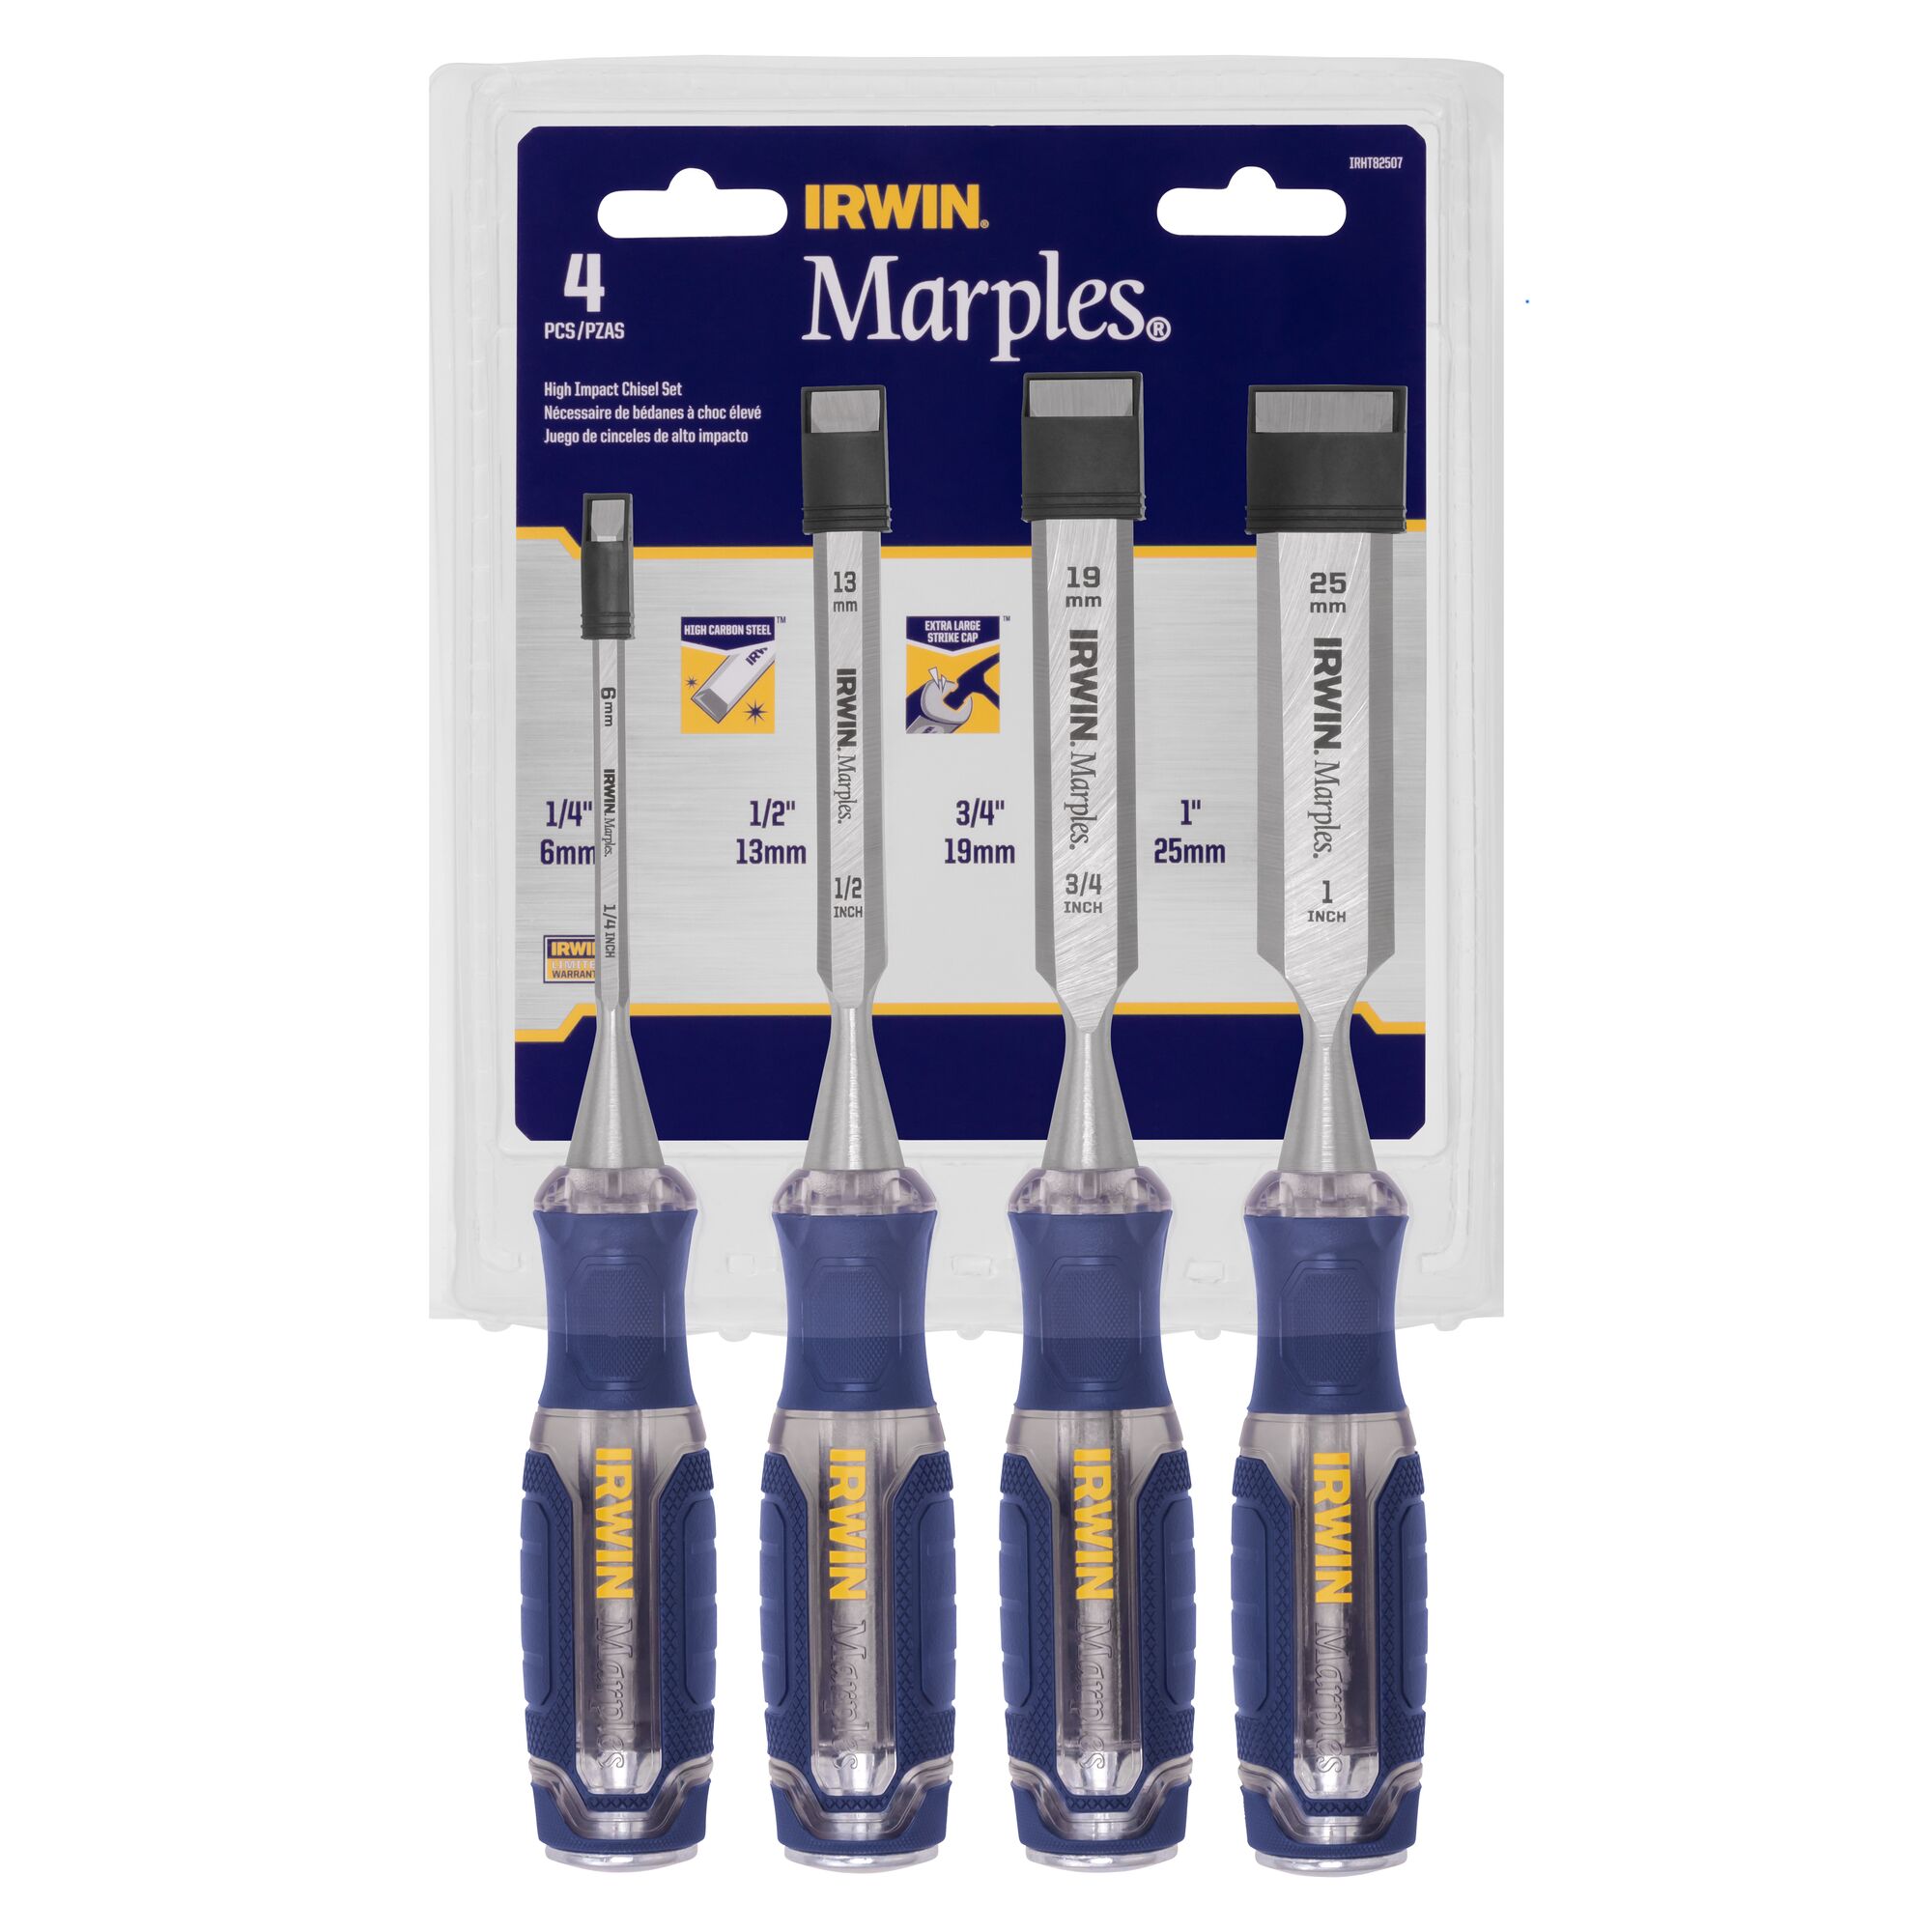 Marples Woodworking Chisels, 1/4; 3/8; 1/2; 5/8; 3/4; 1 in Cut, 1